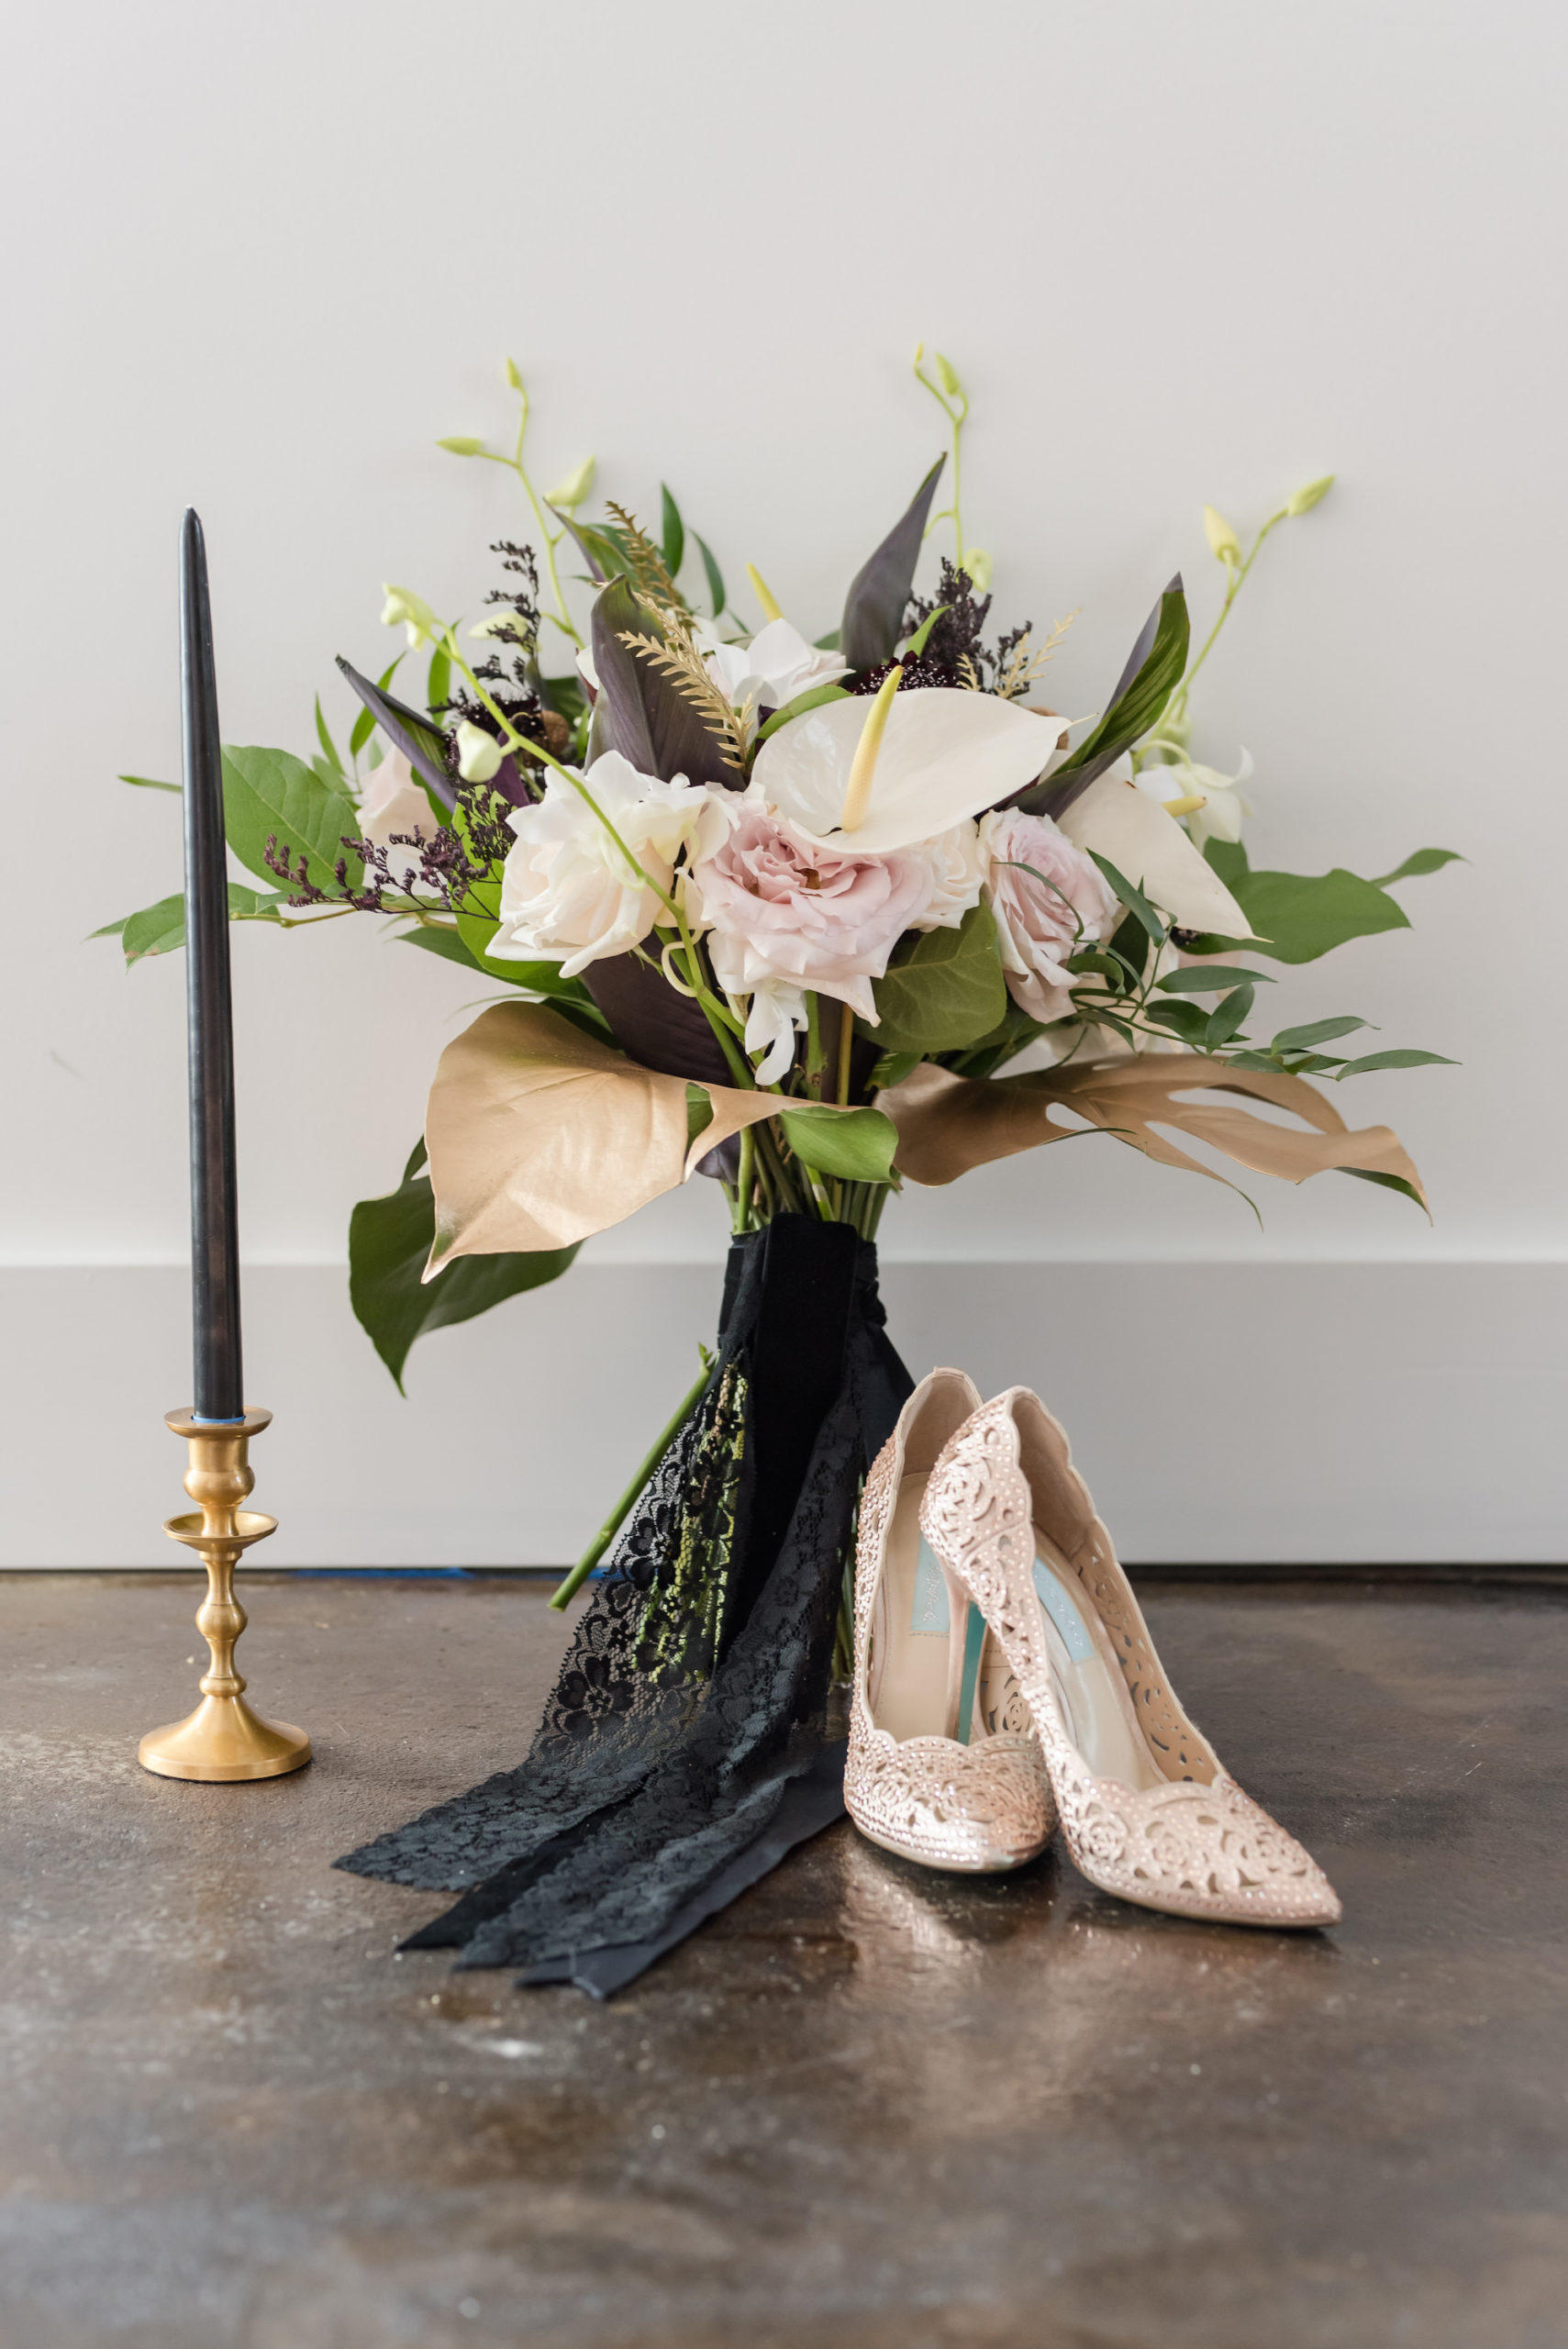 Dark Luxe Style Shoot, White Calla Lily, Blush Pink Roses, Greenery and Gold Tropical Palm Leaves, Black Candlestick on Gold Stand, Rose Gold Pointed Toe Wedding Shoes | Tampa Bay Wedding Planner Elegant Affairs by Design